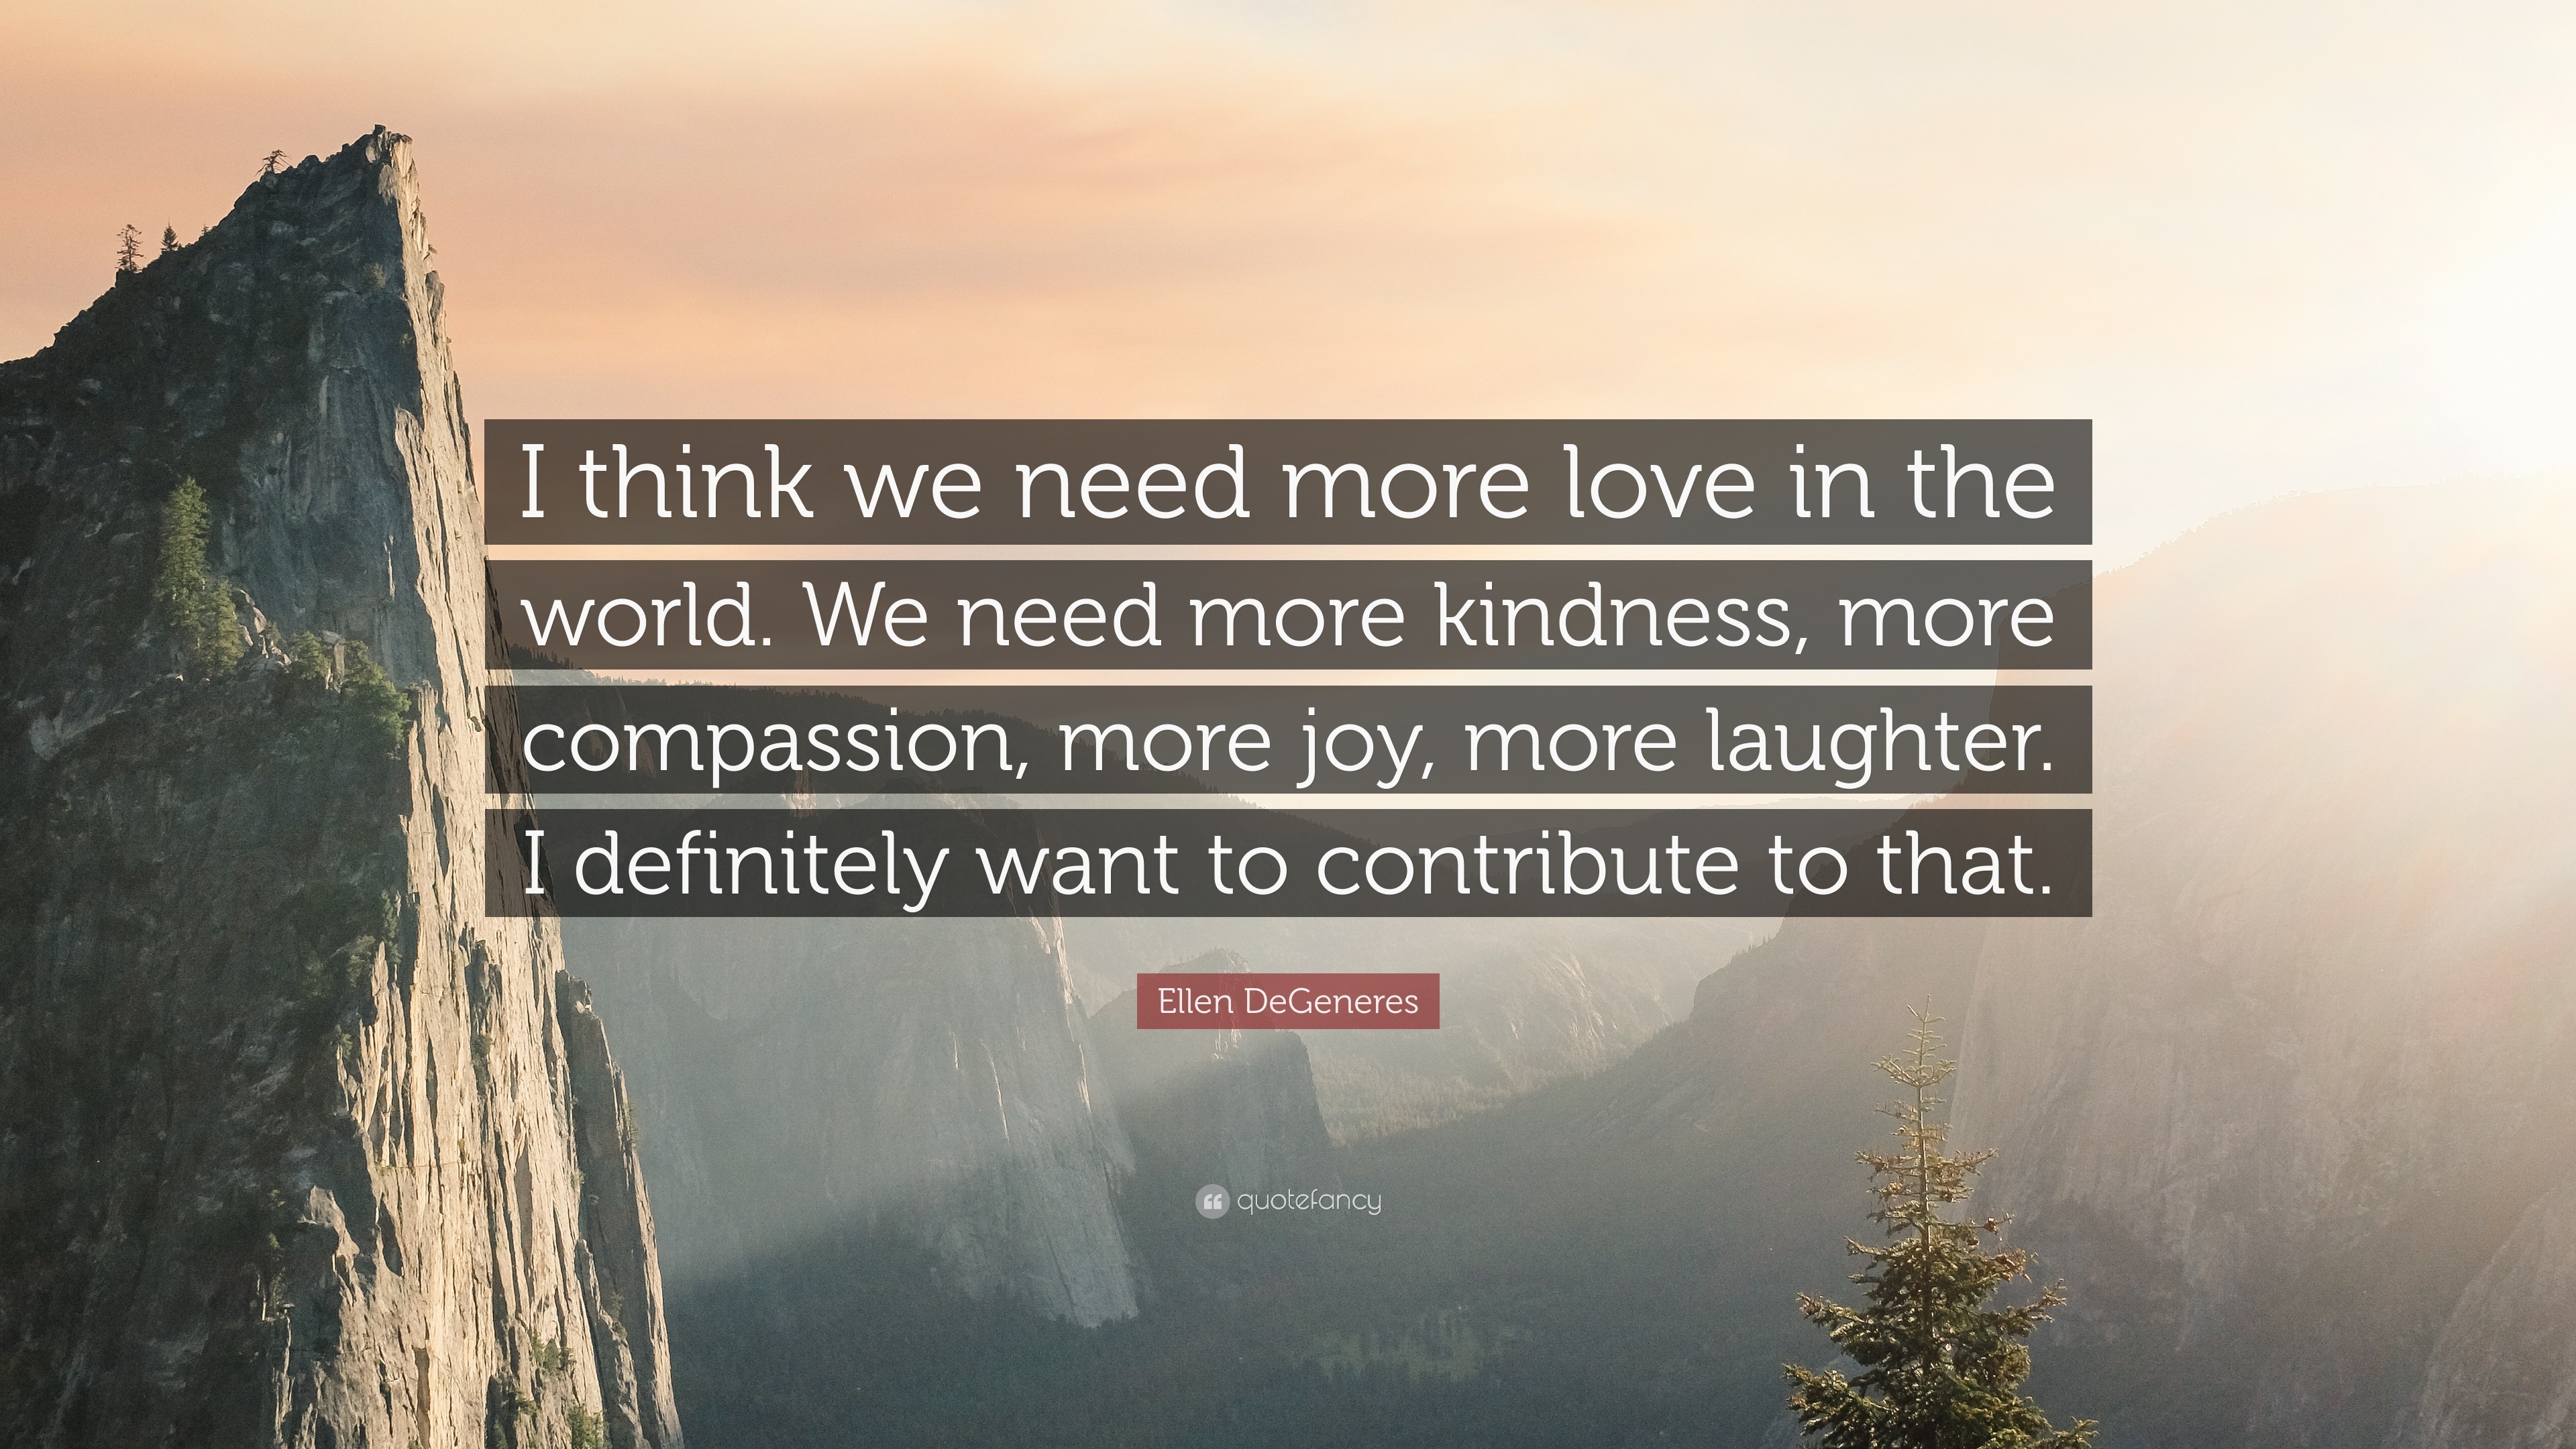 Ellen DeGeneres Quote: “I think we need more love in the world. We need  more kindness, more compassion, more joy, more laughter. I definitely wa”